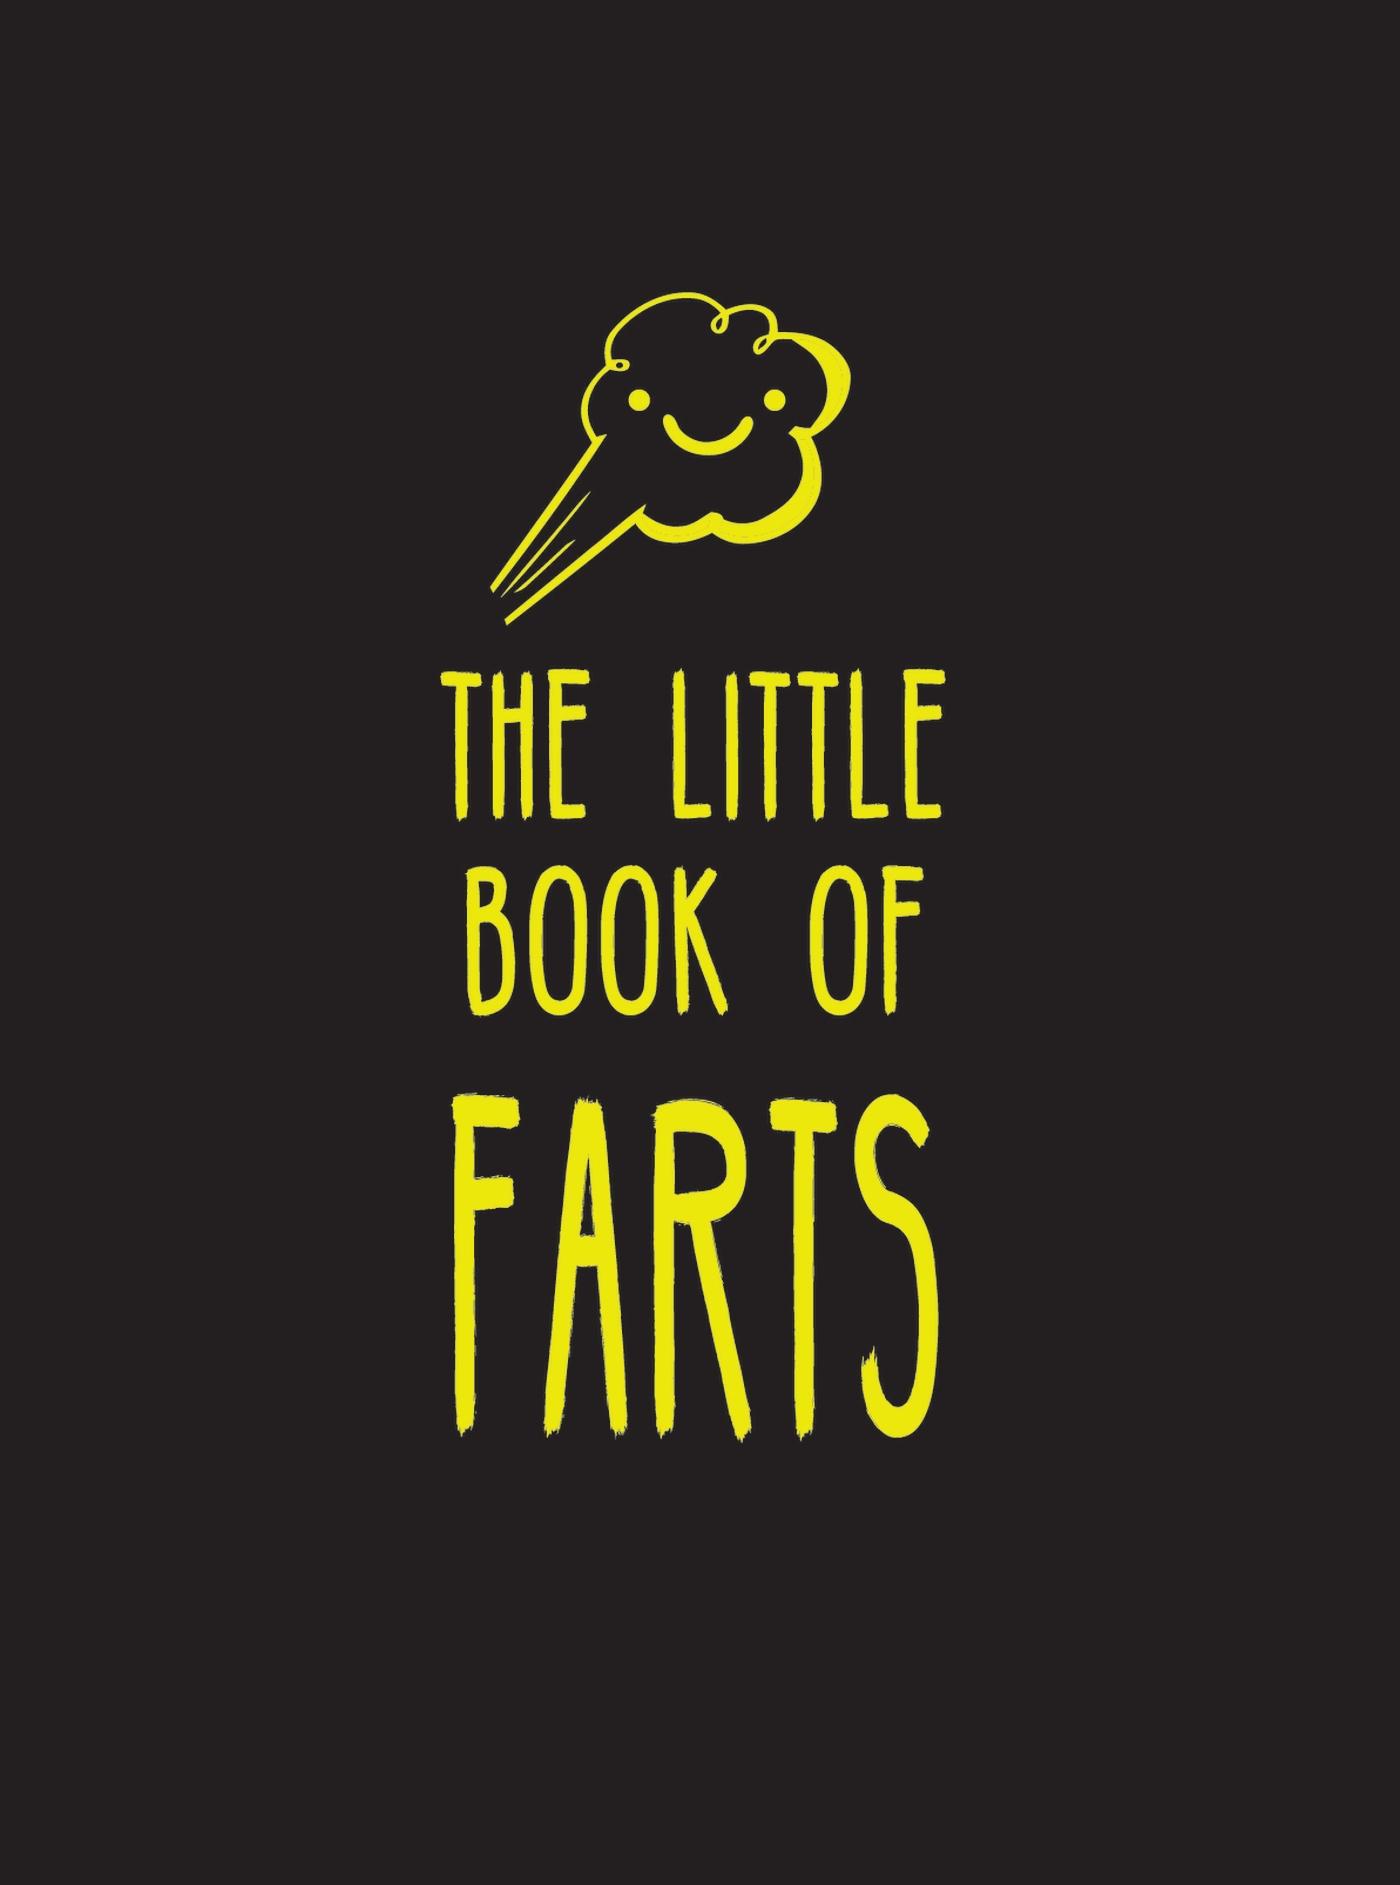 Little Book of Farts: Everything You Didn't Need to Know - And More! (Humour)